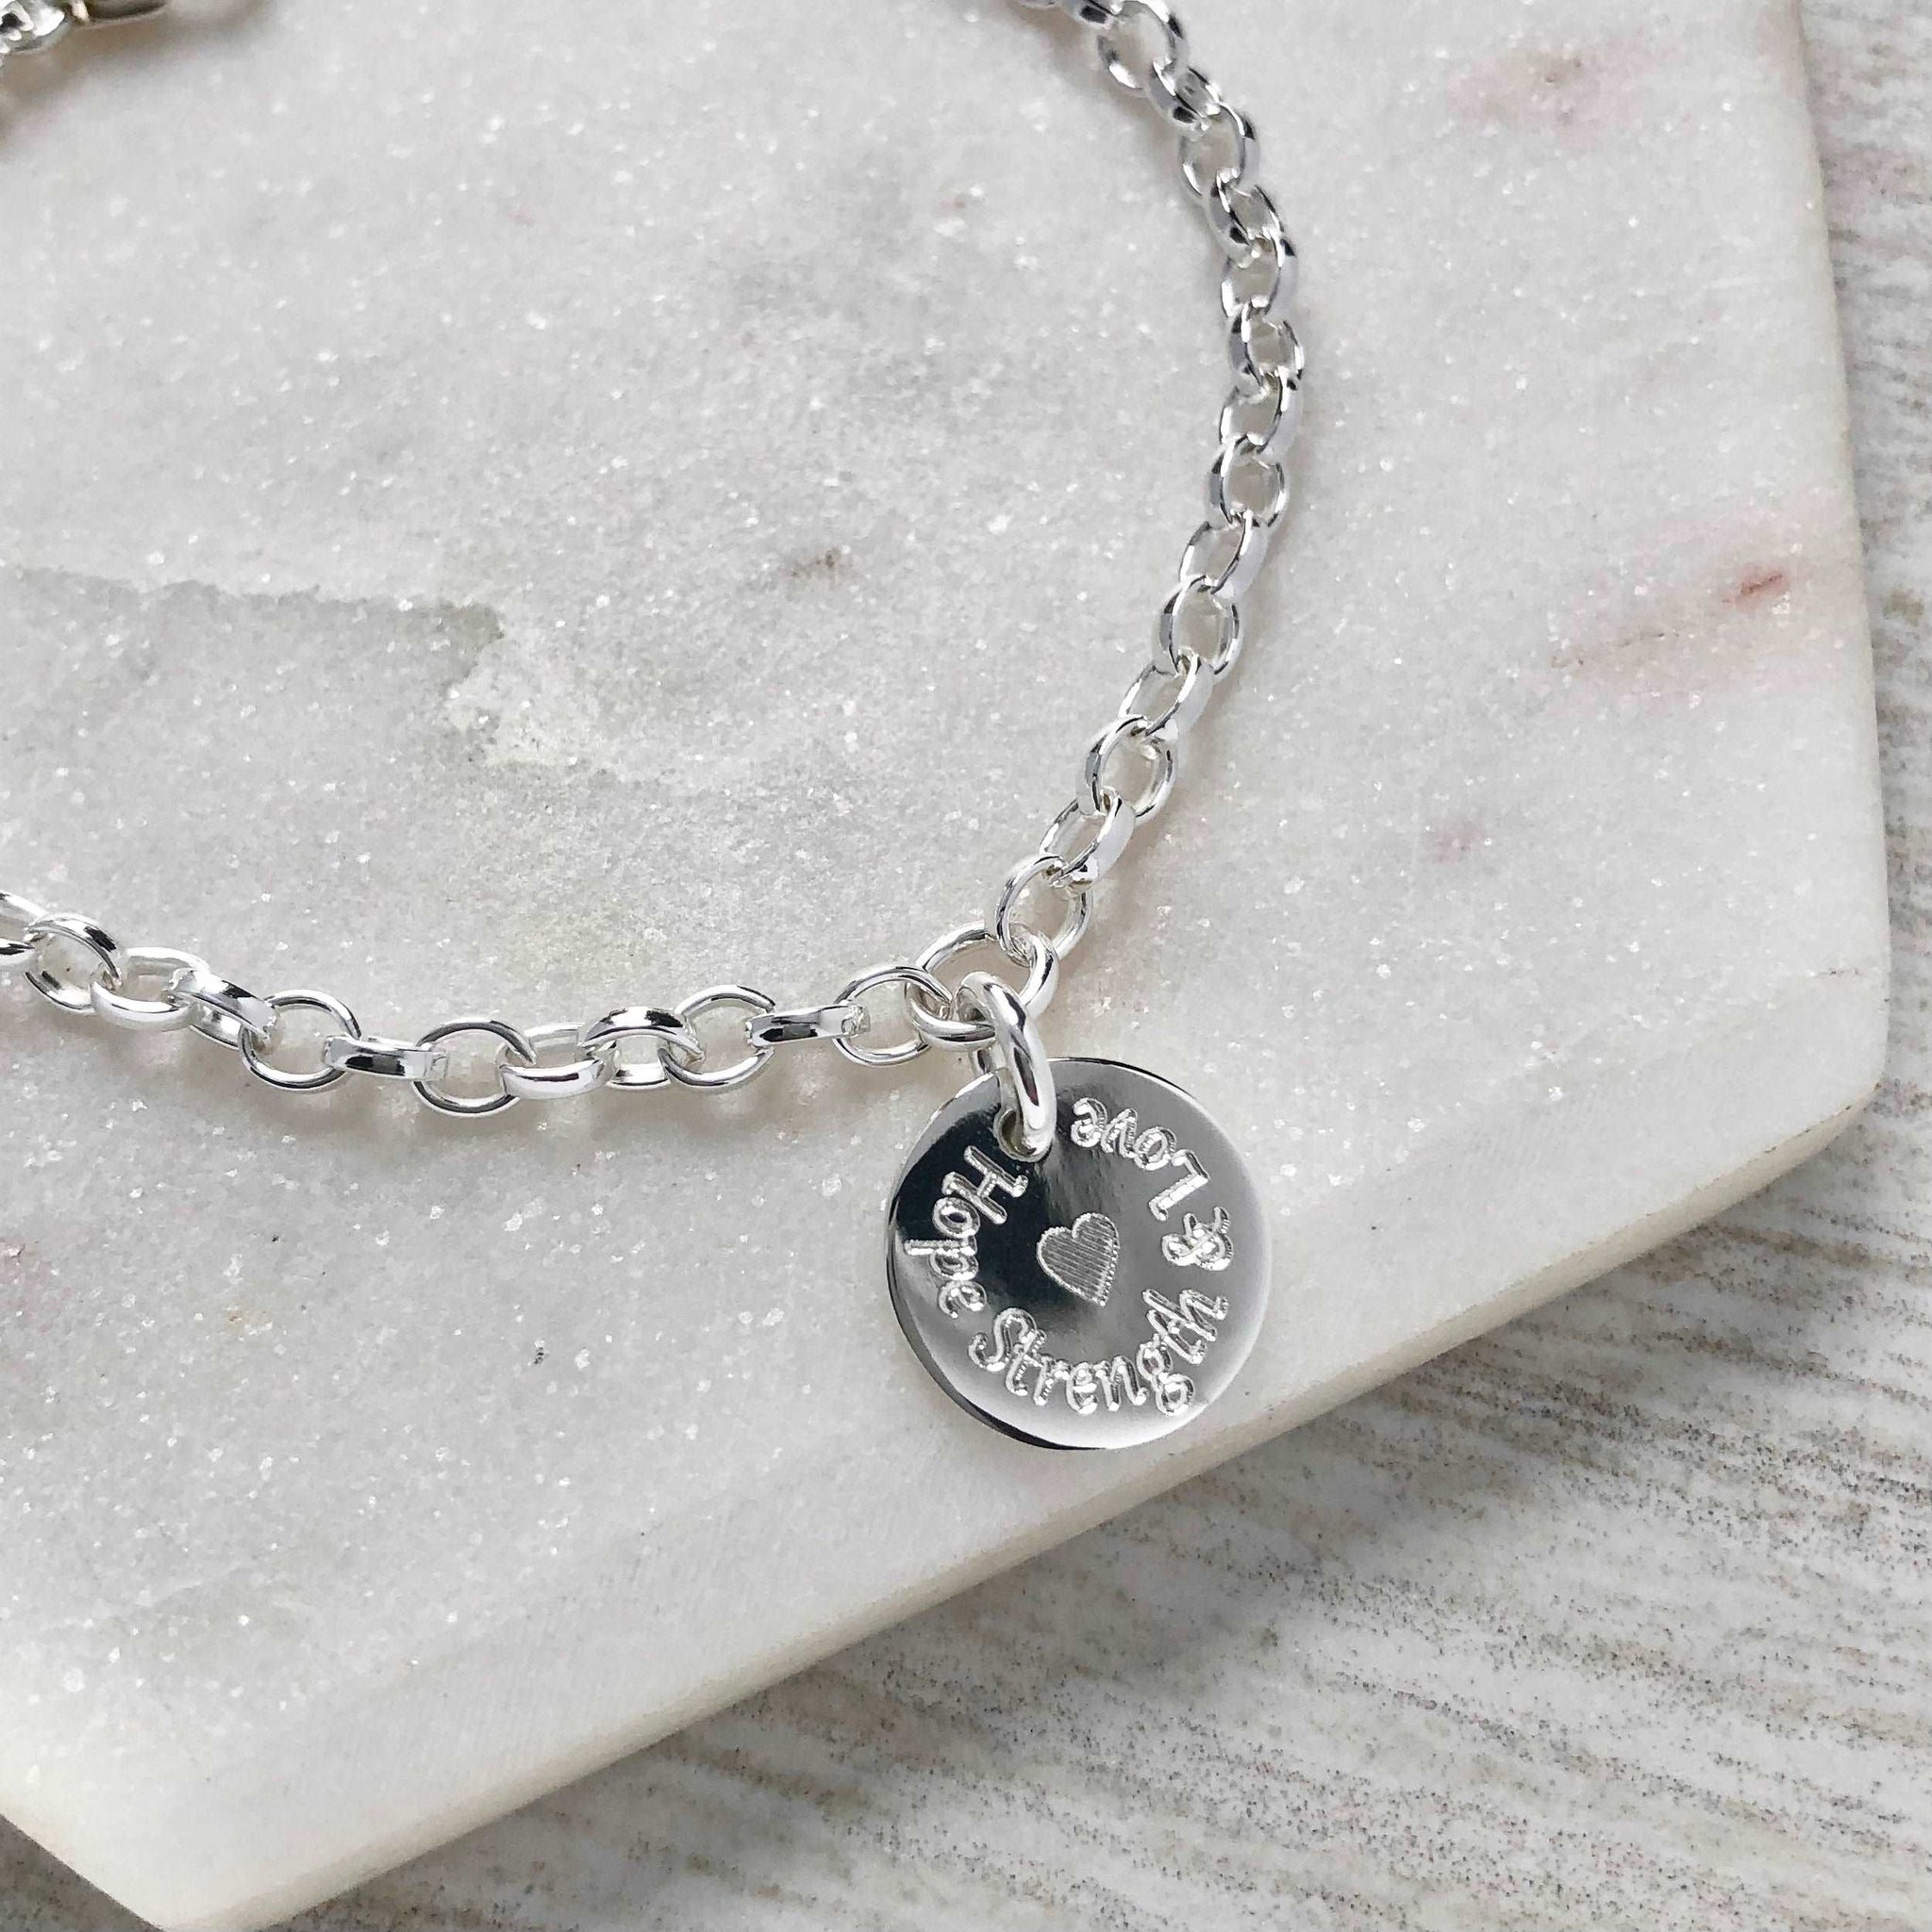 hope strength and love sterling silver charm bracelet